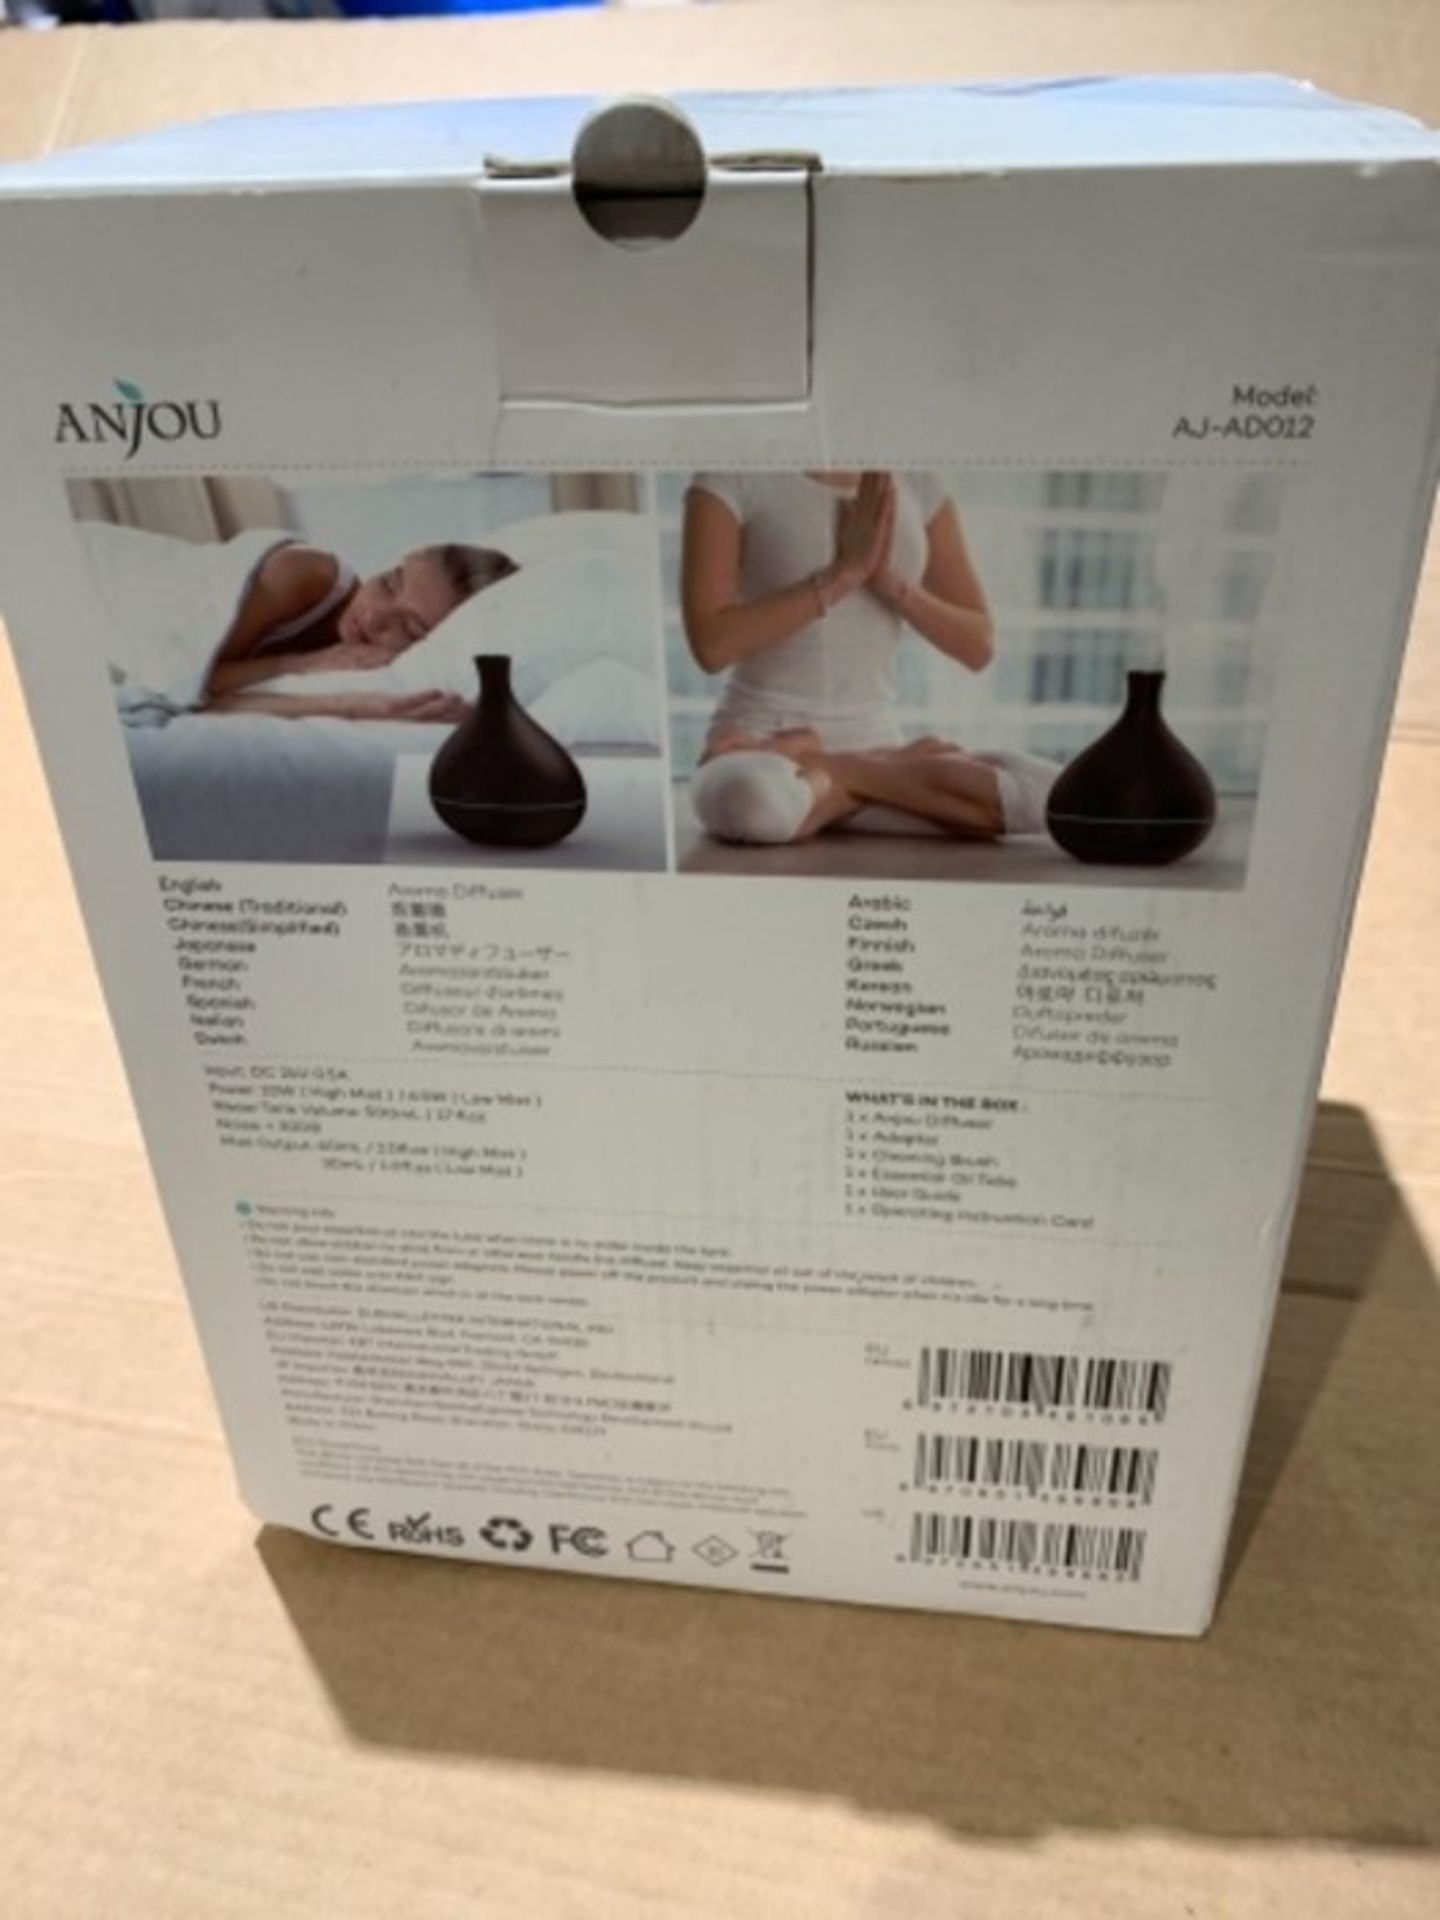 Essential Oil Diffuser, Anjou 500ml Cool Mist Humidifier, One Fill for 12hrs Consisten - Image 2 of 3